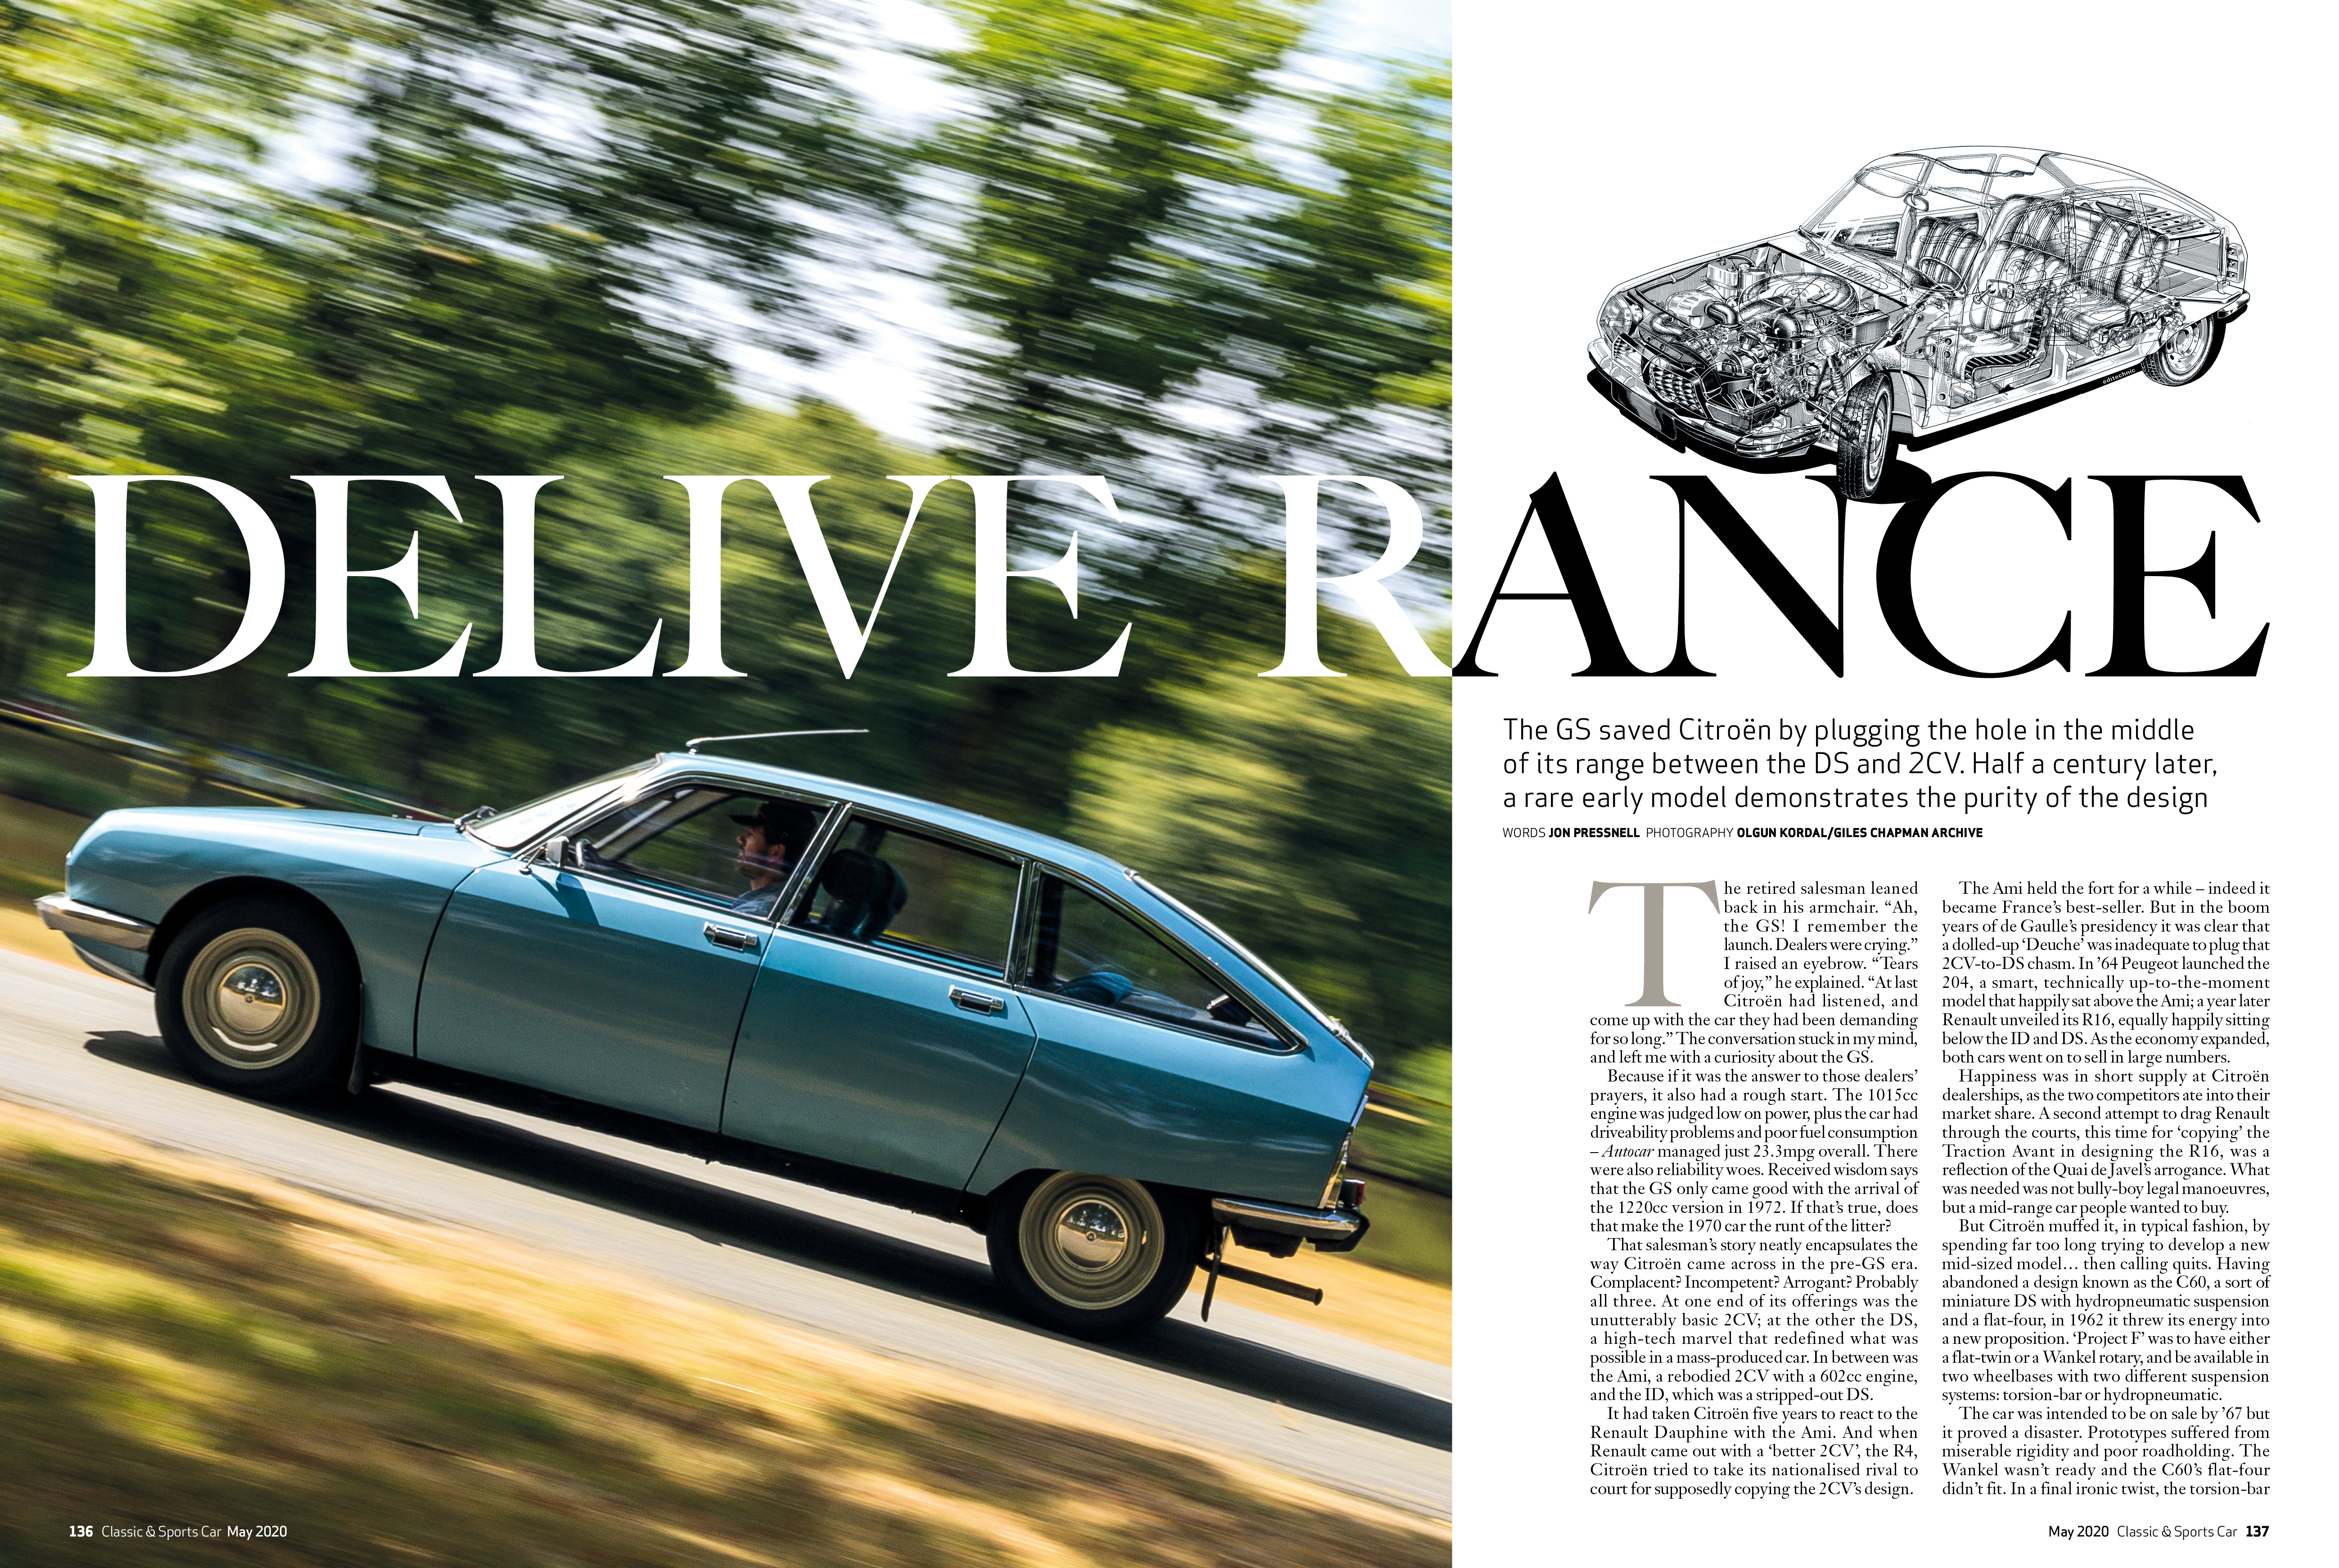 Classic & Sports Car – E-type vs Corvette: inside the May 2020 issue of C&SC